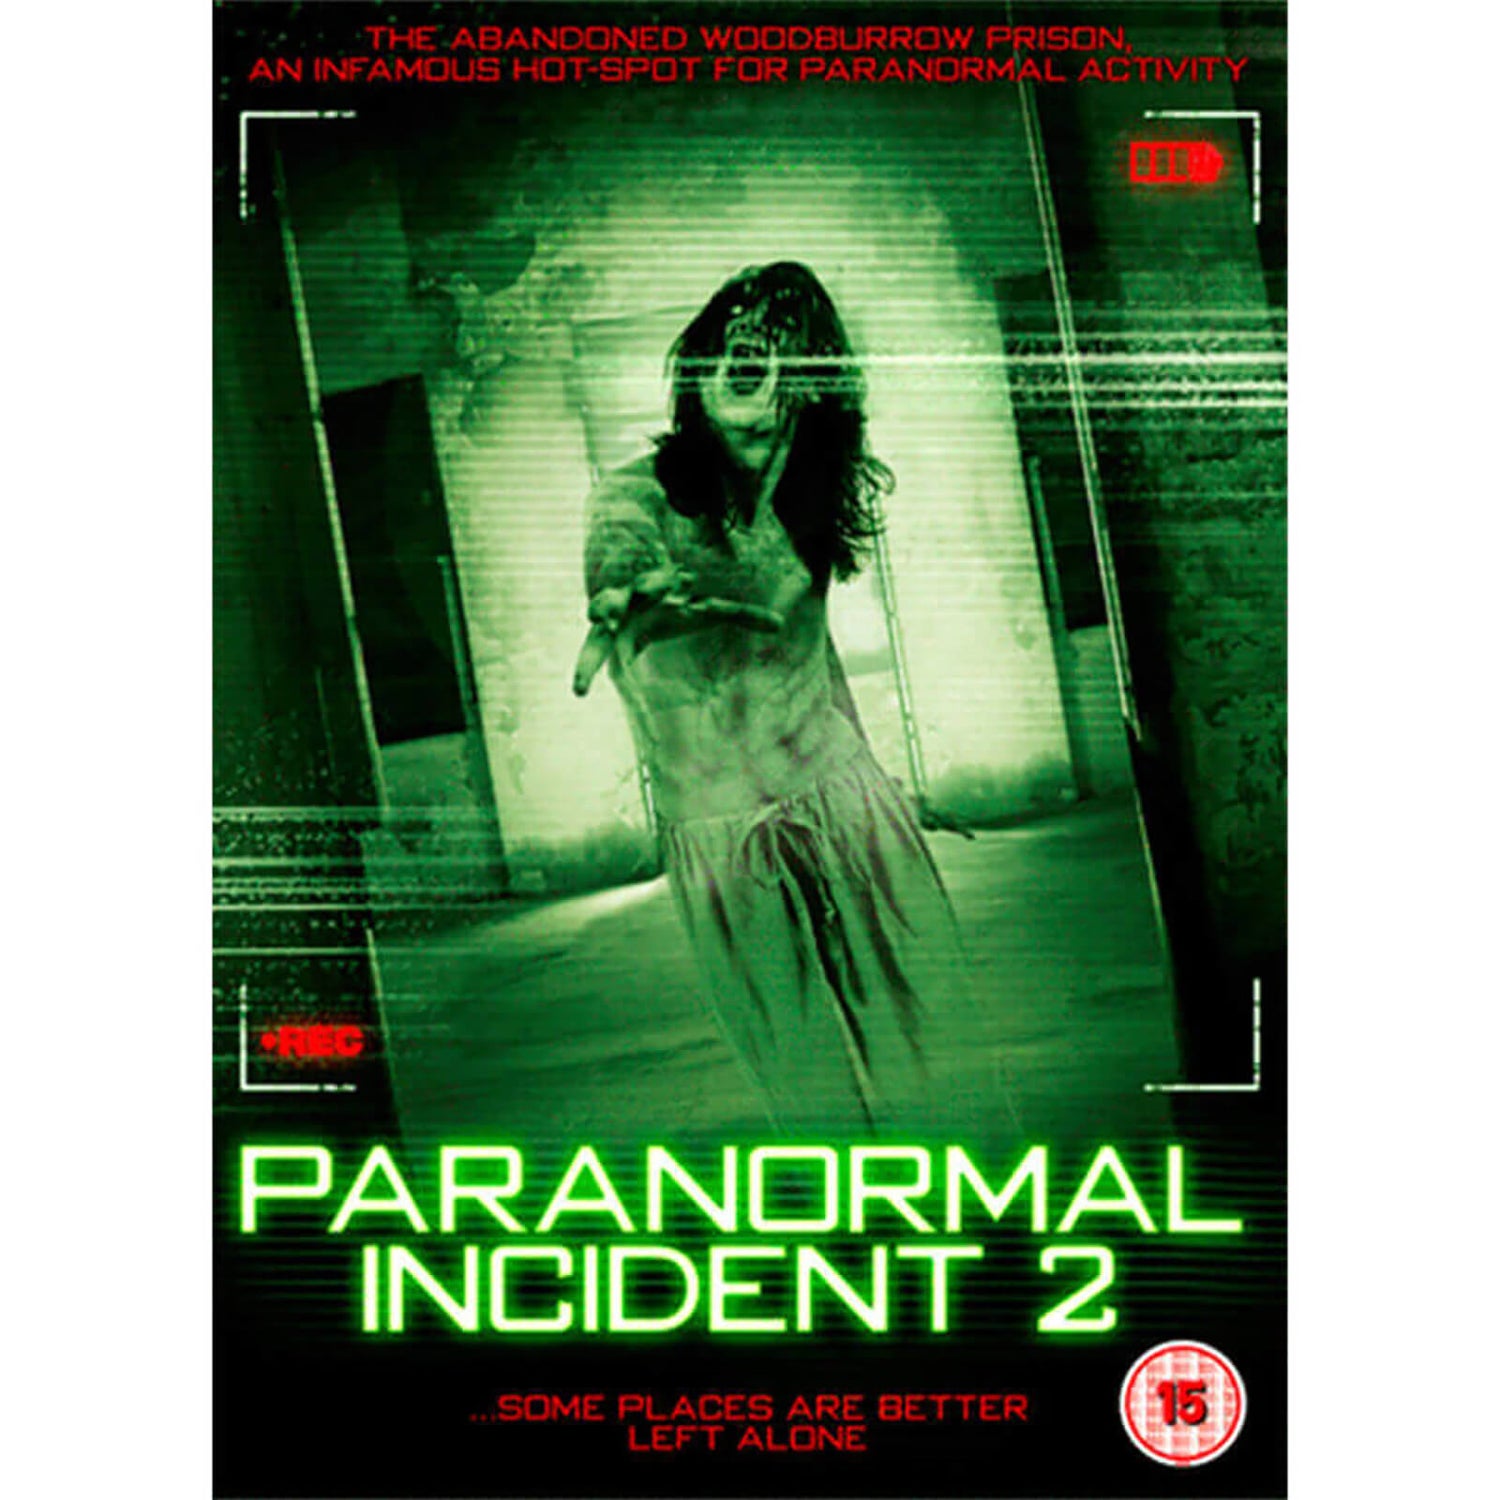 The Paranormal Incident 2